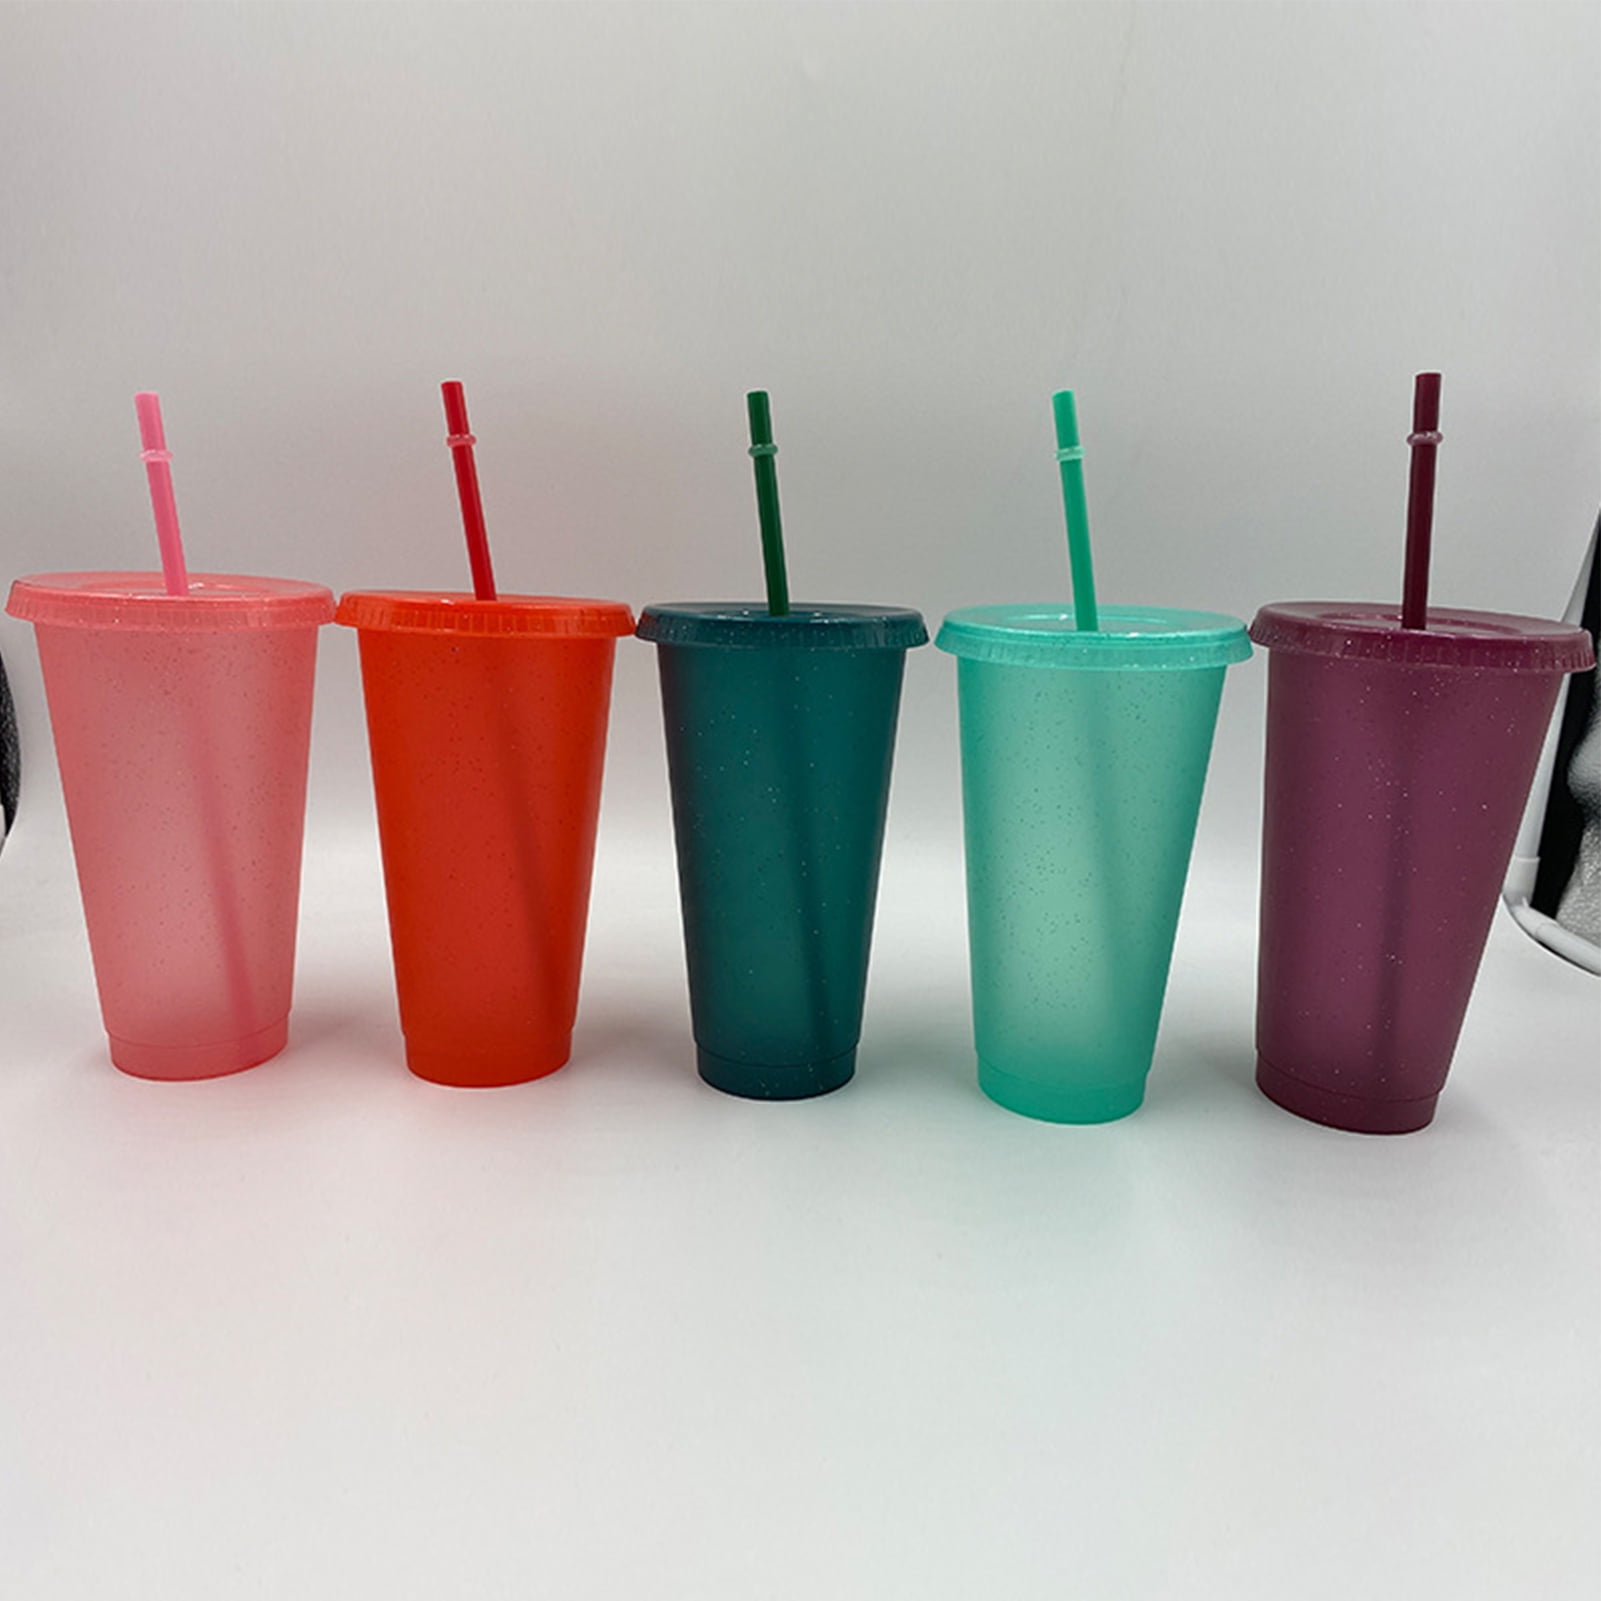 Mug Glass Cups with Wood Lids and Straws 500ml Wide Mouth Drinking Mason  Glass Tumbler Reusable Beer…See more Mug Glass Cups with Wood Lids and  Straws